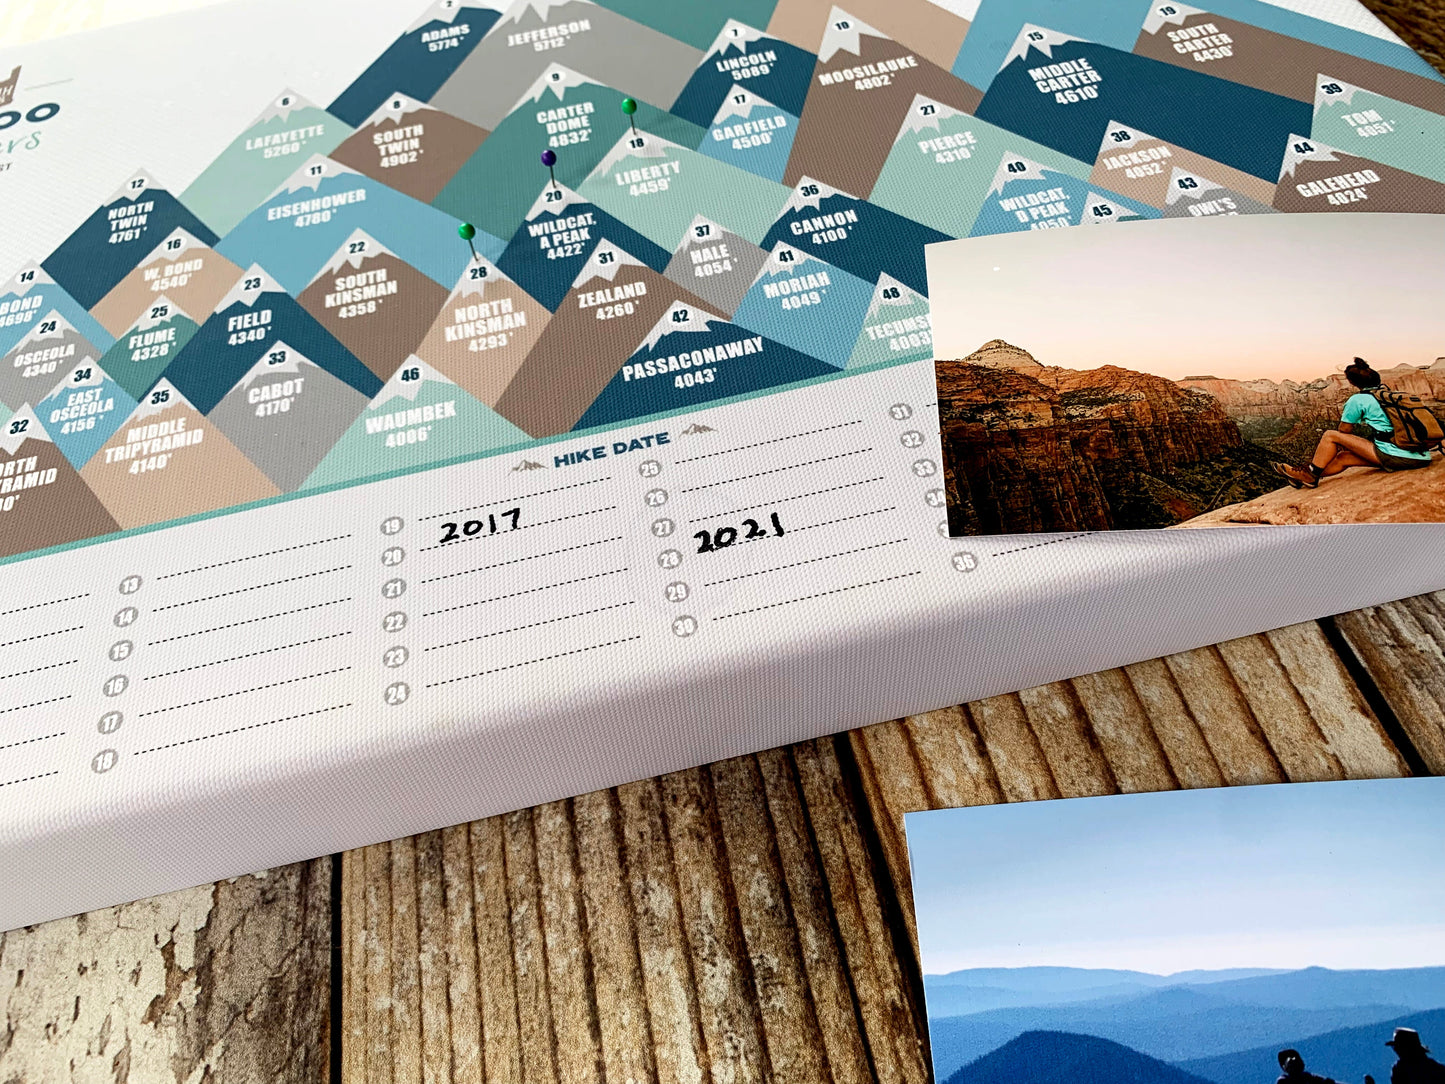 New Hampshire 4000 Footer Checklist Push Pin Board, Includes Hike Date, White Mountains decor, CANVAS Map World Vibe Studio 